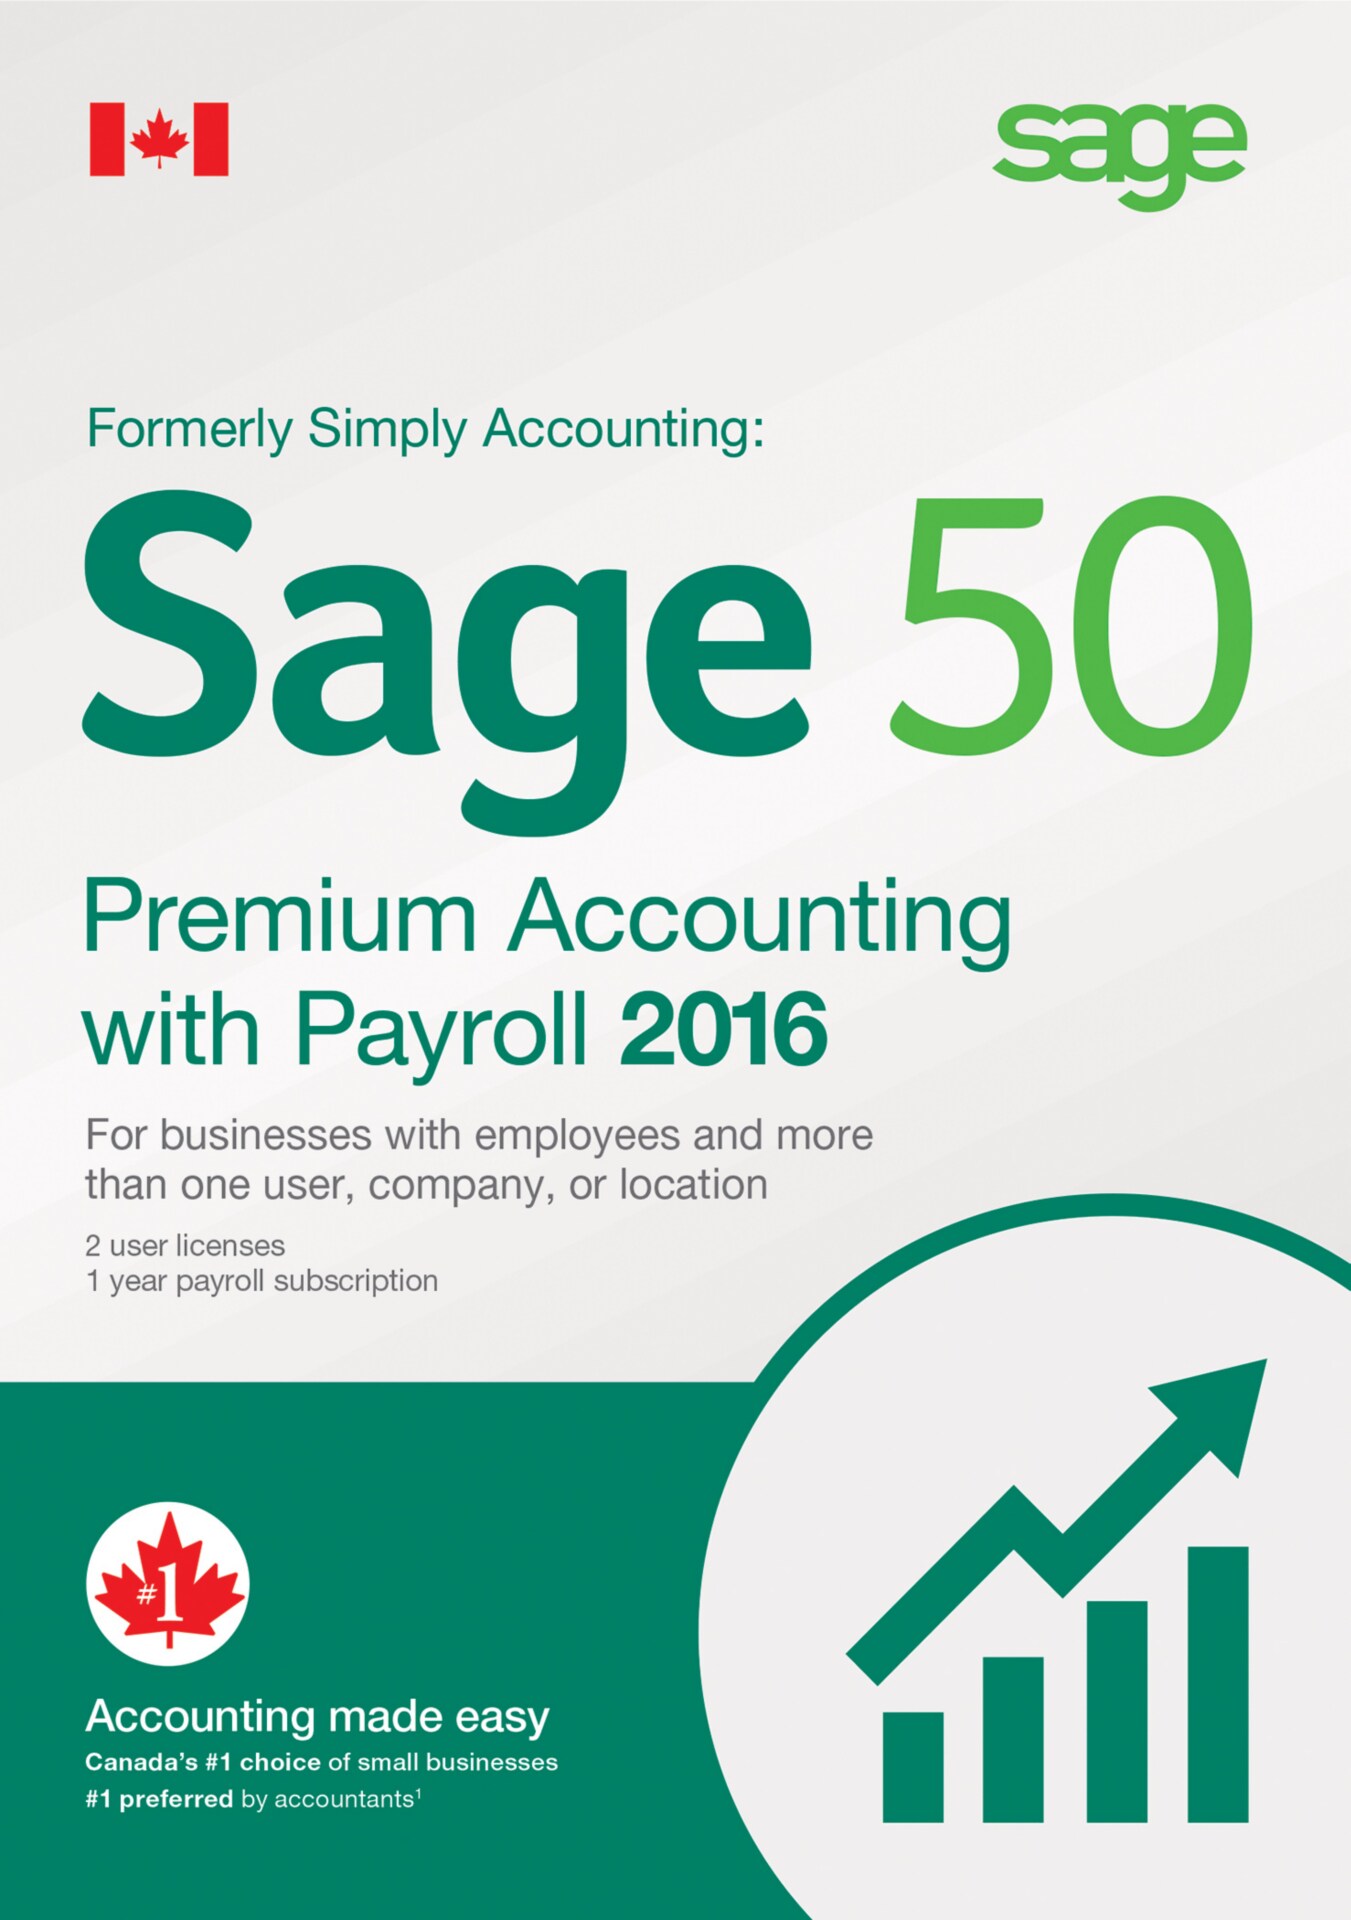 Sage 50 Premium Accounting 2016 with Payroll Services